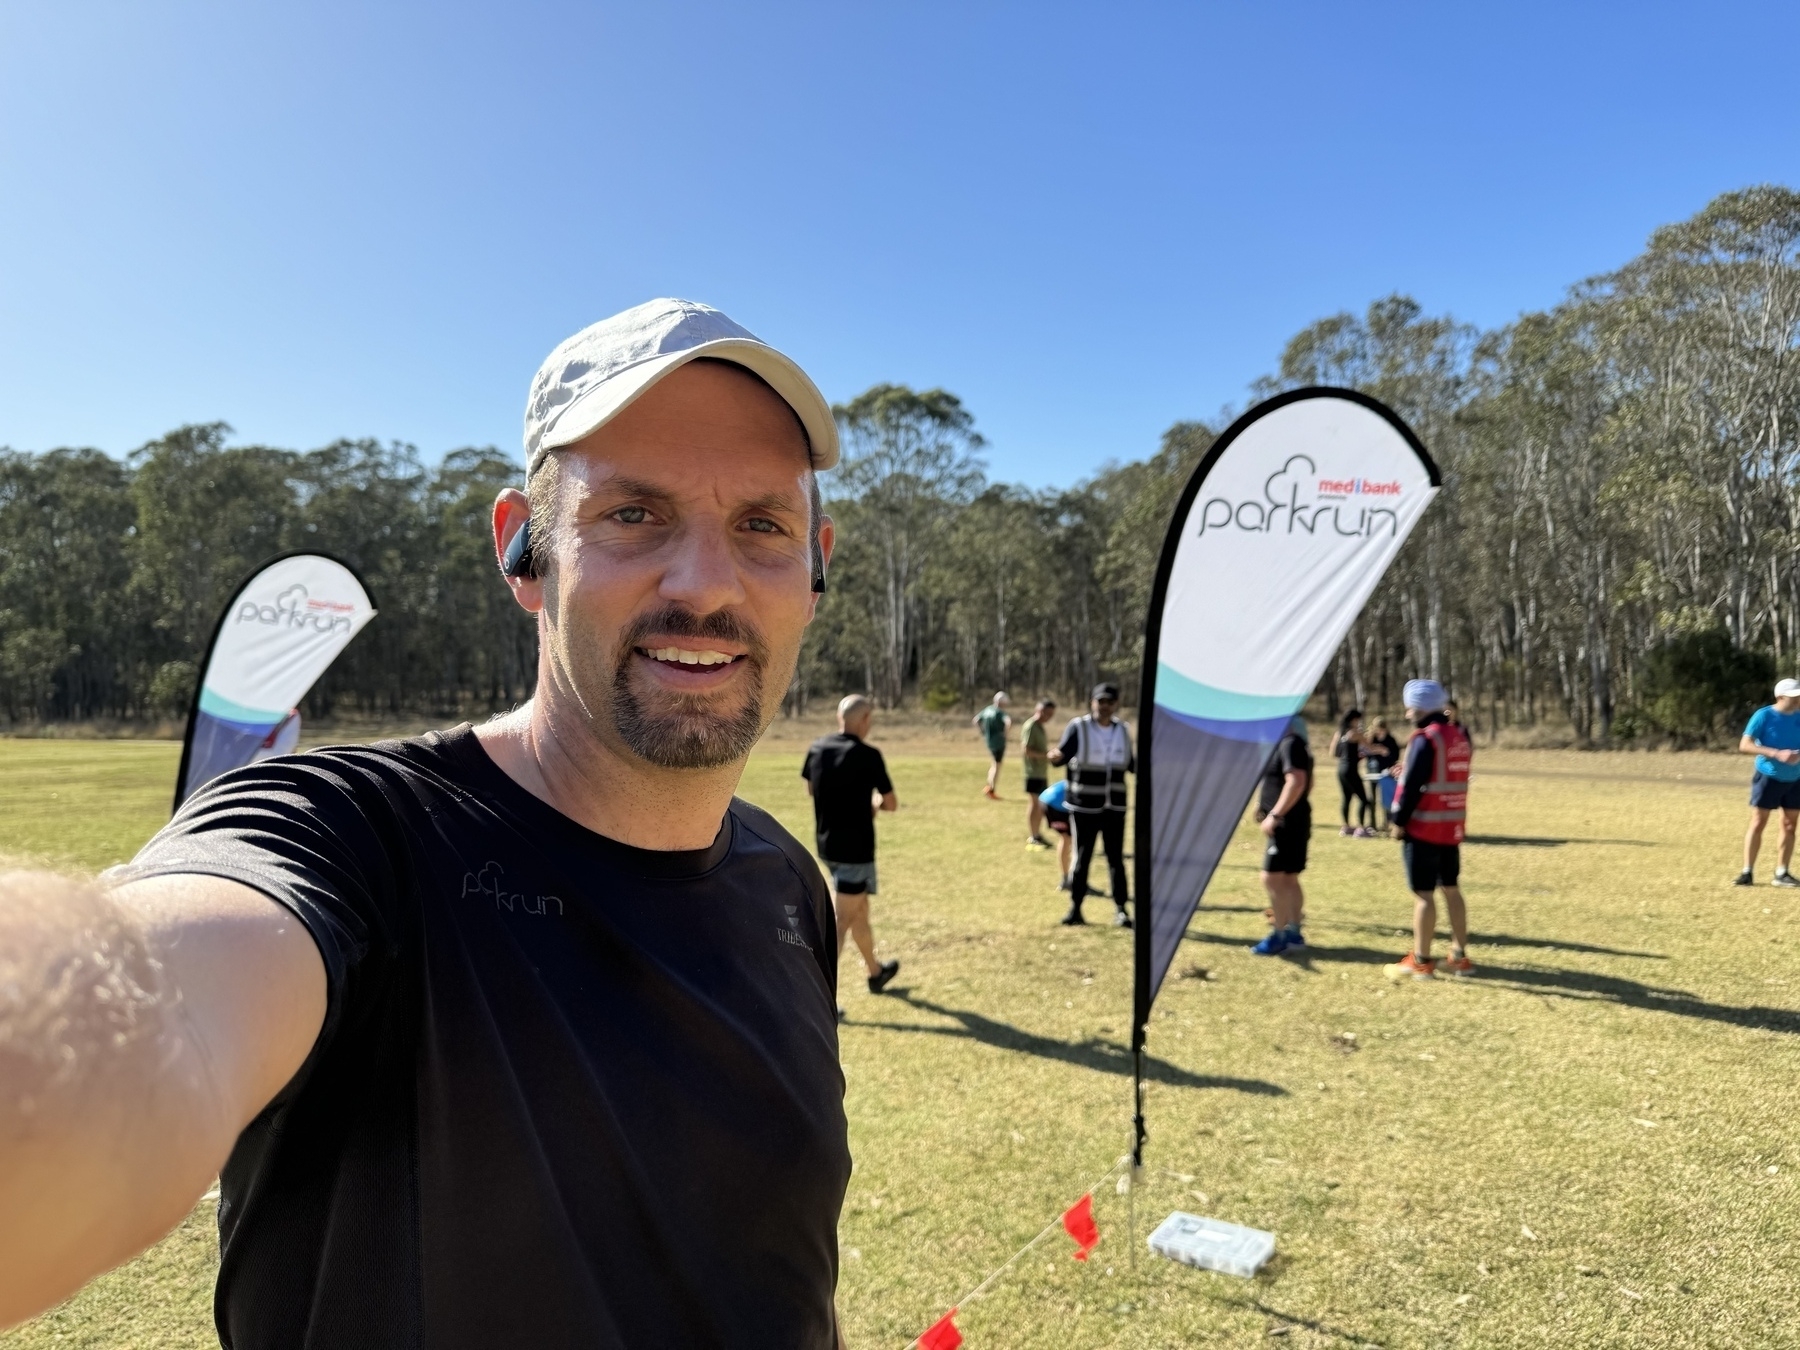 A selfie of me (41 year old male with a goatee wearing black running clothes and a white running cap) standing in front of Parkrun banners and other parkrun participants and volunteers